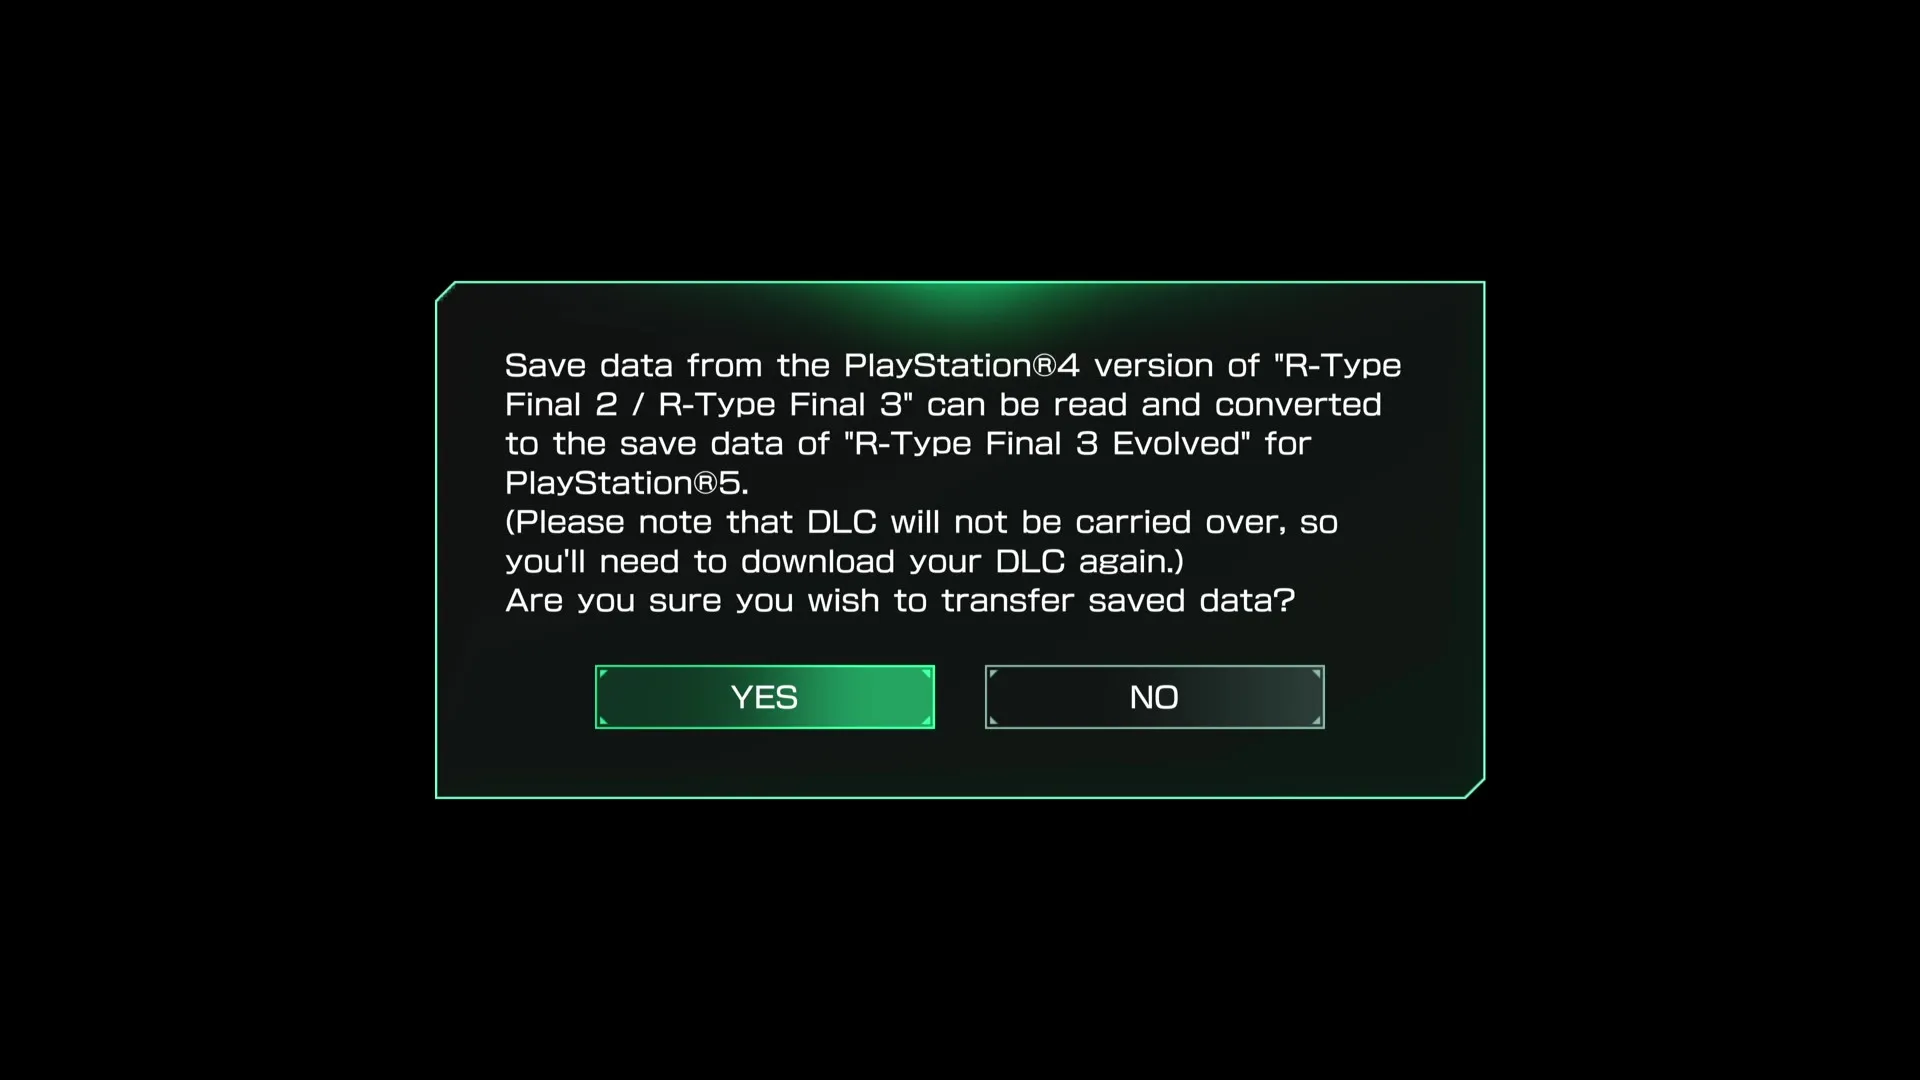 Transferring saved data from the PS4 version